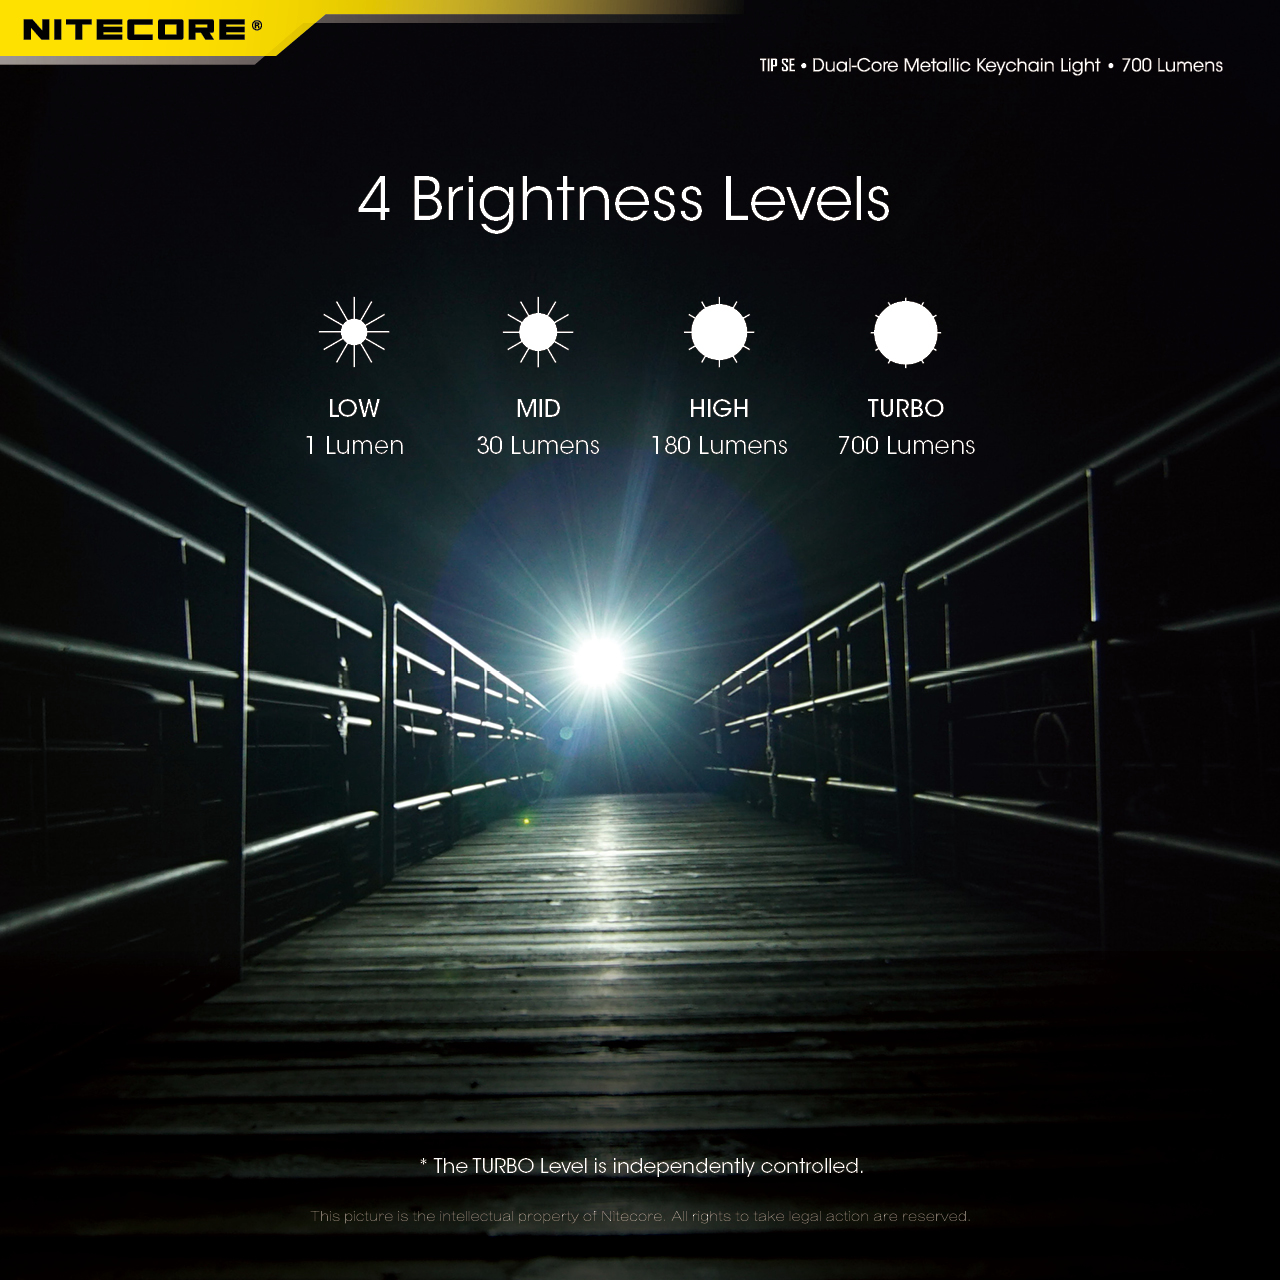 NITECORE-TIP-SE-700LM-P8-Dual-Light-LED-Keychain-Flashlight-Type-C-Rechargeable-QC-Every-Day-Carry-M-1976045-12